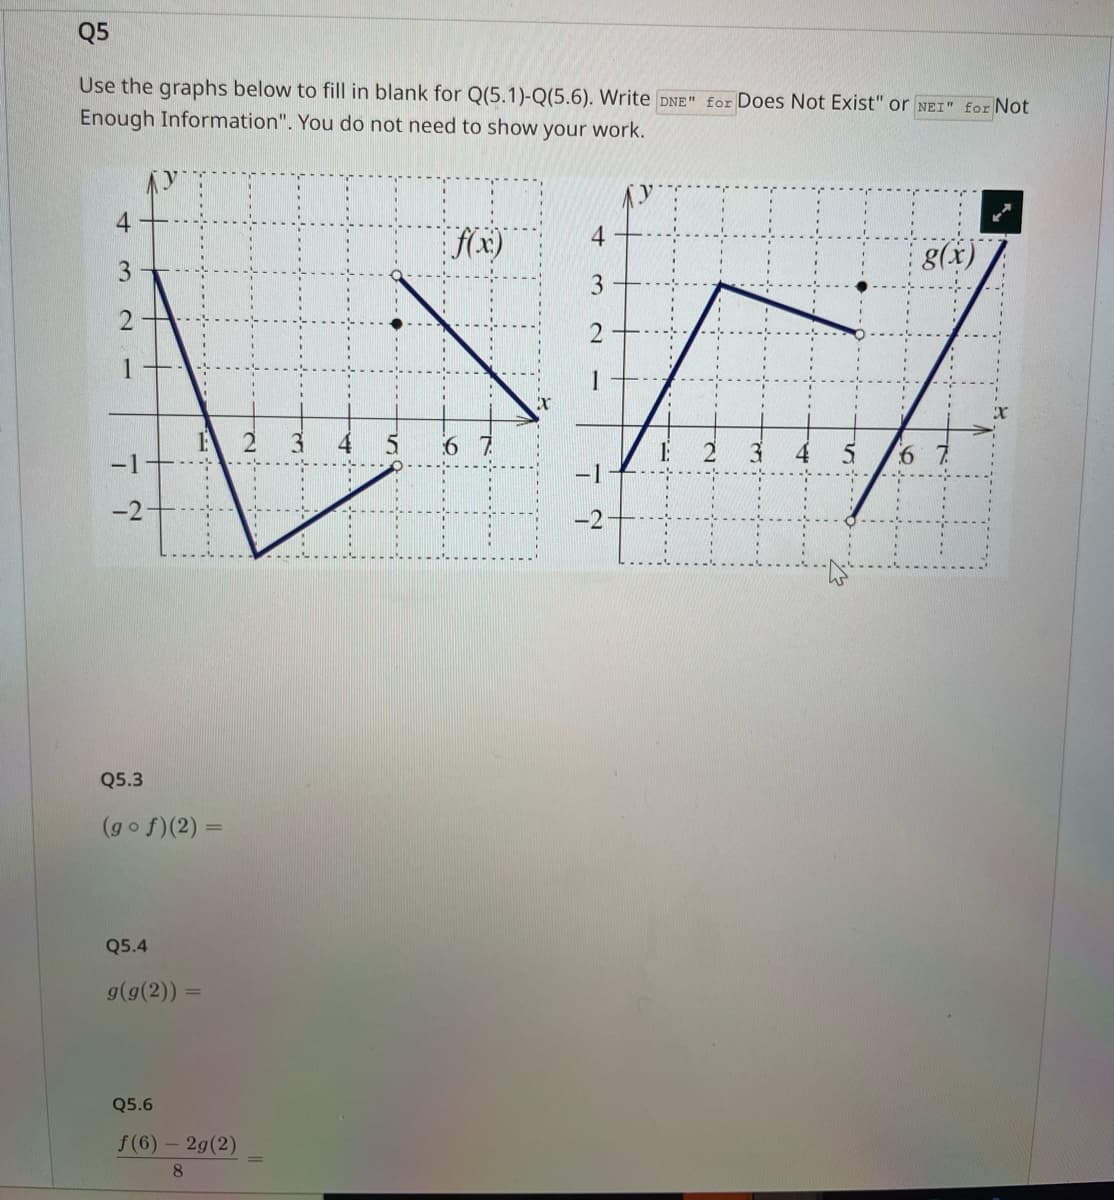 Q5
Use the graphs below to fill in blank for Q(5.1)-Q(5.6). Write DNE" for Does Not Exist" or NEI" for Not
Enough Information". You do not need to show your work.
4
f(x)
3
2
DW
67
-2
4
3
2
7
-1
-2
Q5.3
(gof)(2) =
Q5.4
....
g(g(2)) =
Q5.6
f(6) - 2g(2)
8
N
M.
for
3 4
g(x)
5 6 7